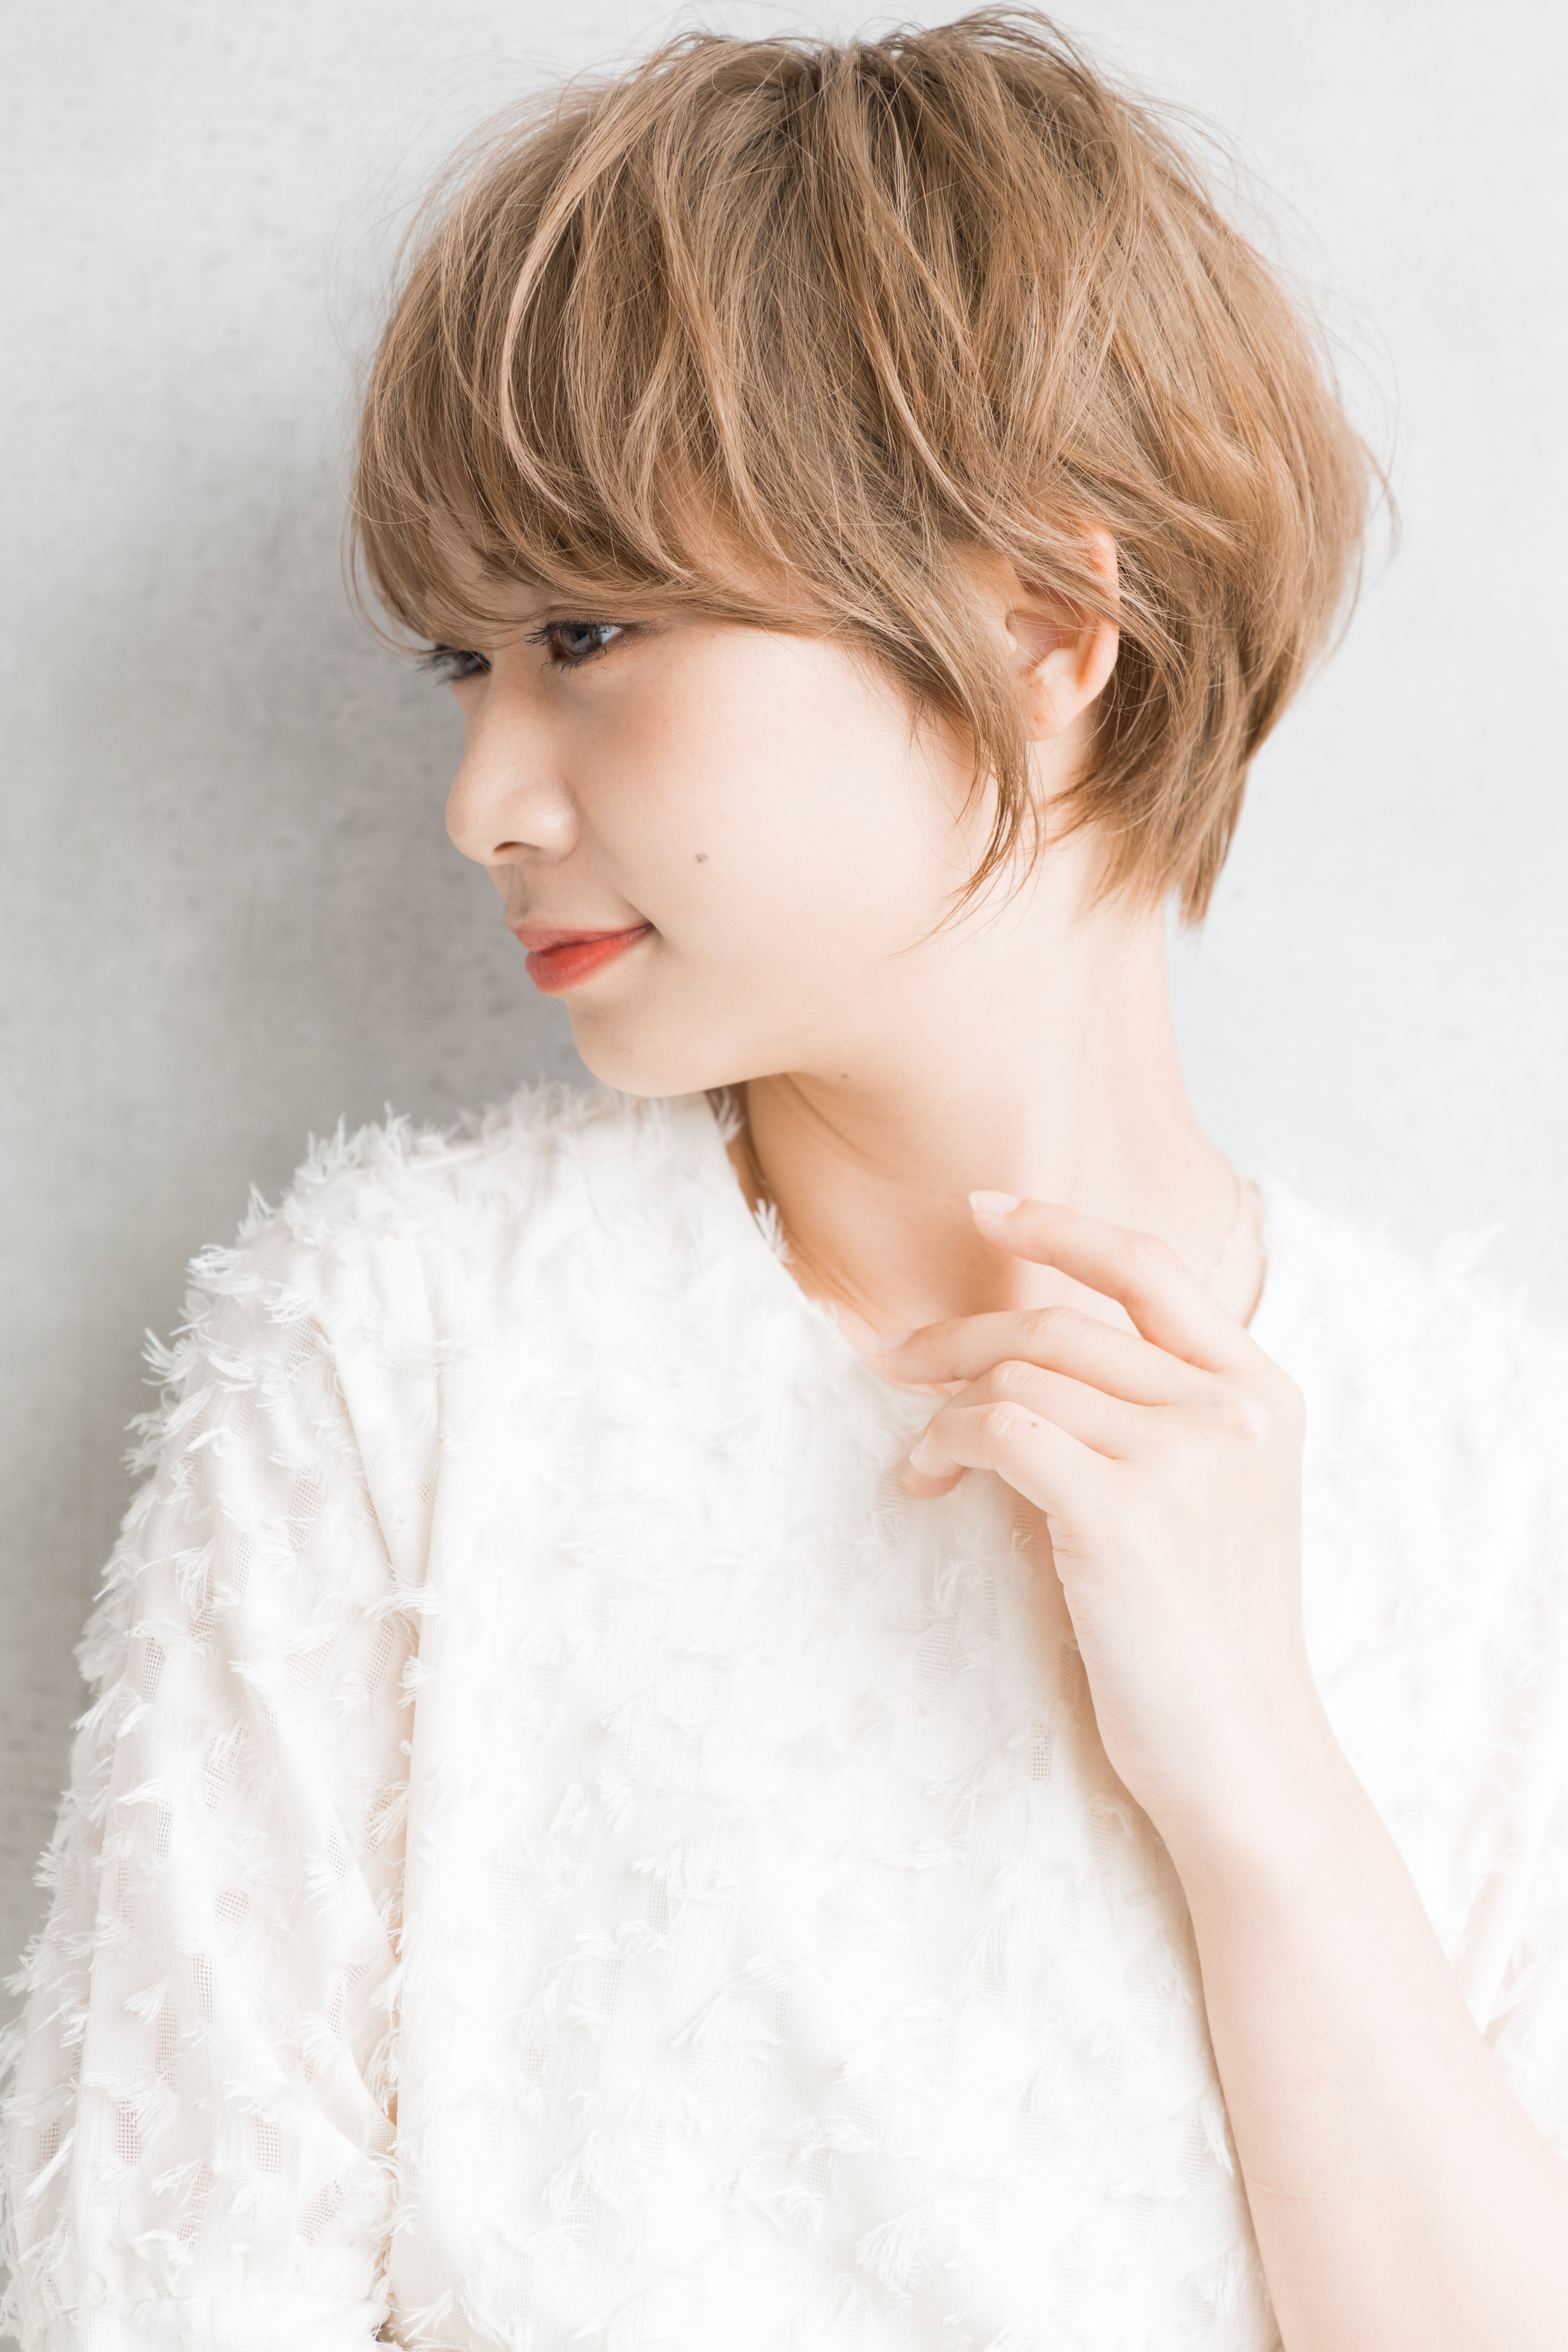 Letters～letters hair design～【レターズ レターズ ヘアーデザイン】のスタイル紹介。Lettersショート☆